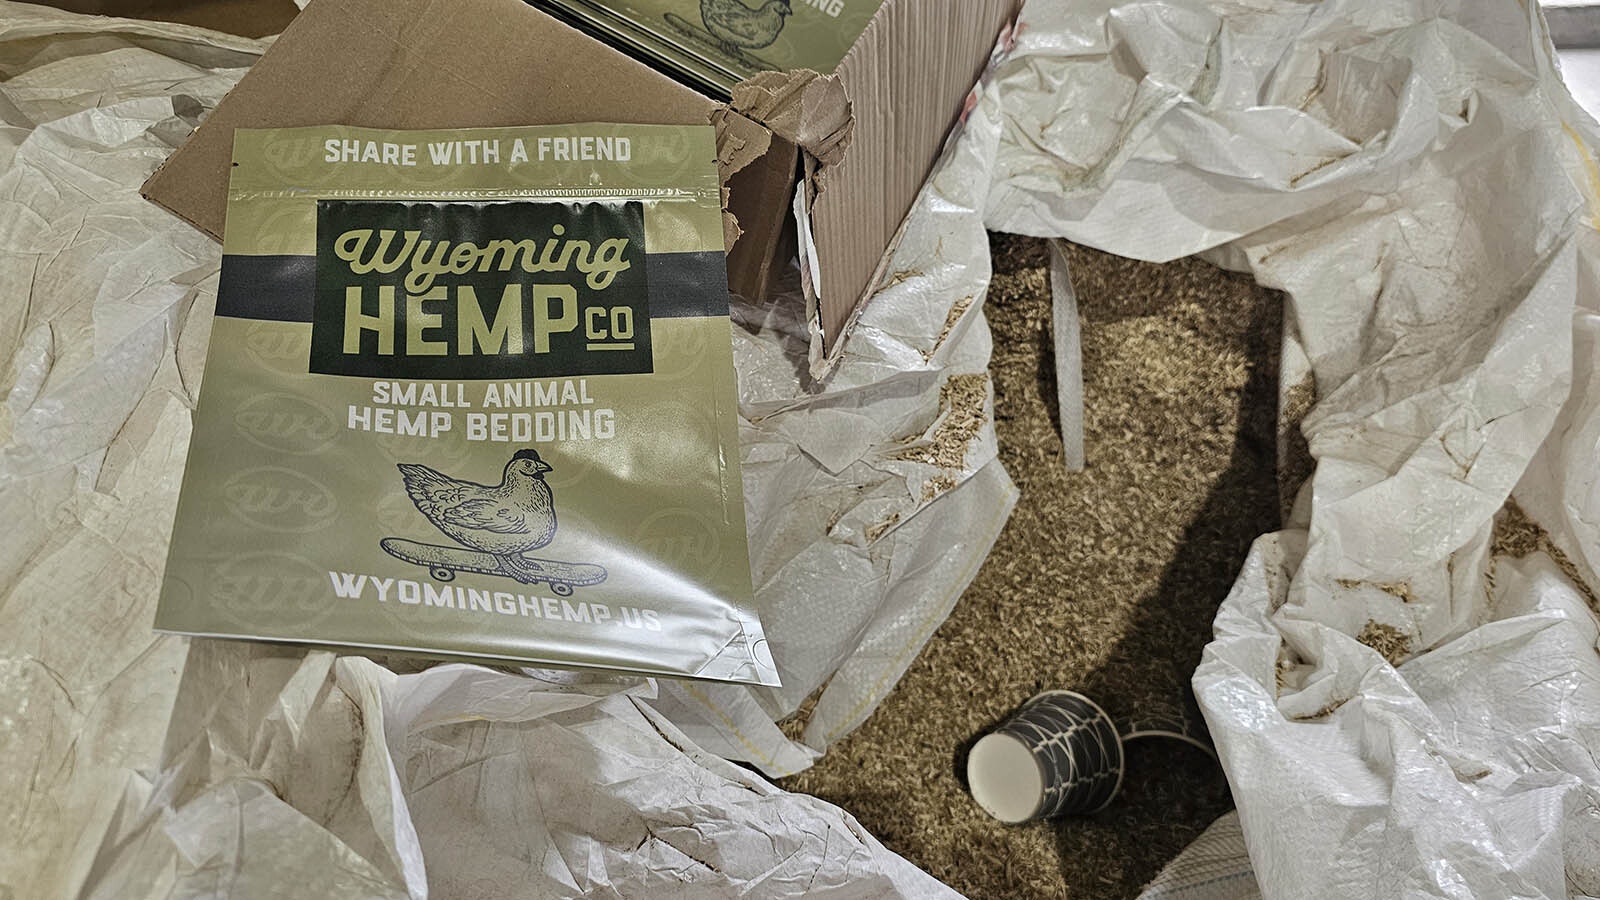 Sample bags of bedding that Justin Loeffler gives away for people to give hemp bedding a try. Hemp is resistant to mites and helps curtail ammonia.